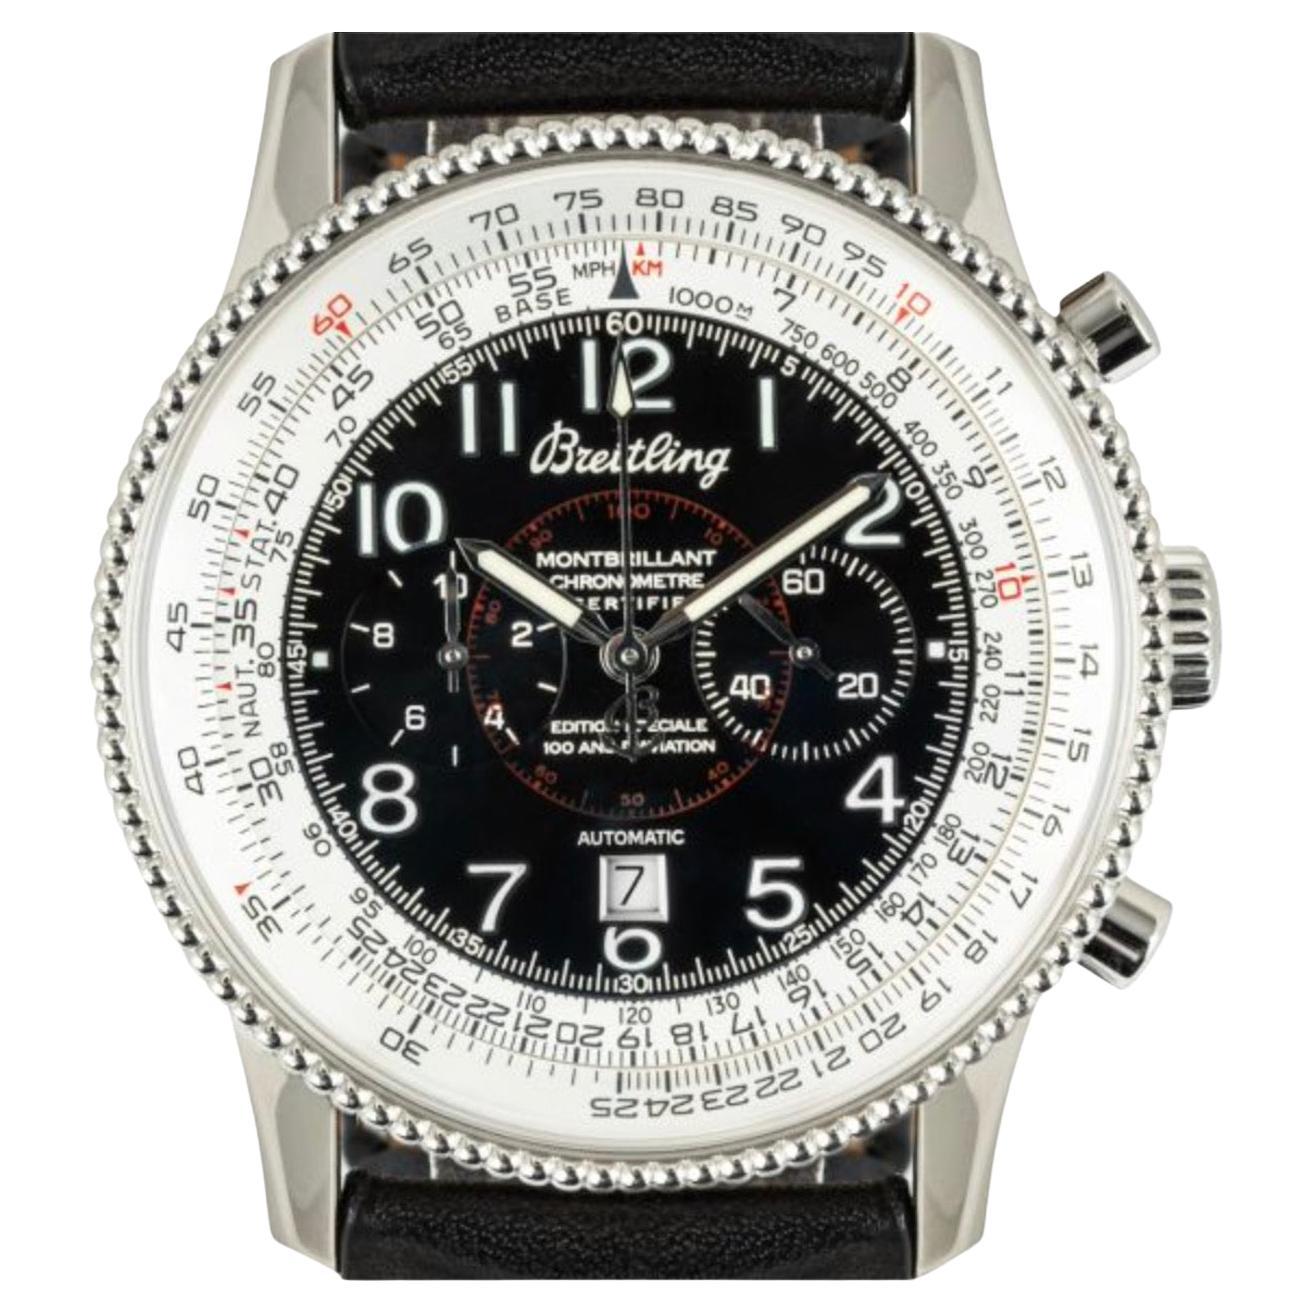 A mens special edition 42mm Navitimer Montbrilliant crafted in stainless steel by Breitling. Features a black centred dial with a silvery white border, a date aperture, two flyback chronograph counters and a fixed stainless steel bezel.

Fitted with